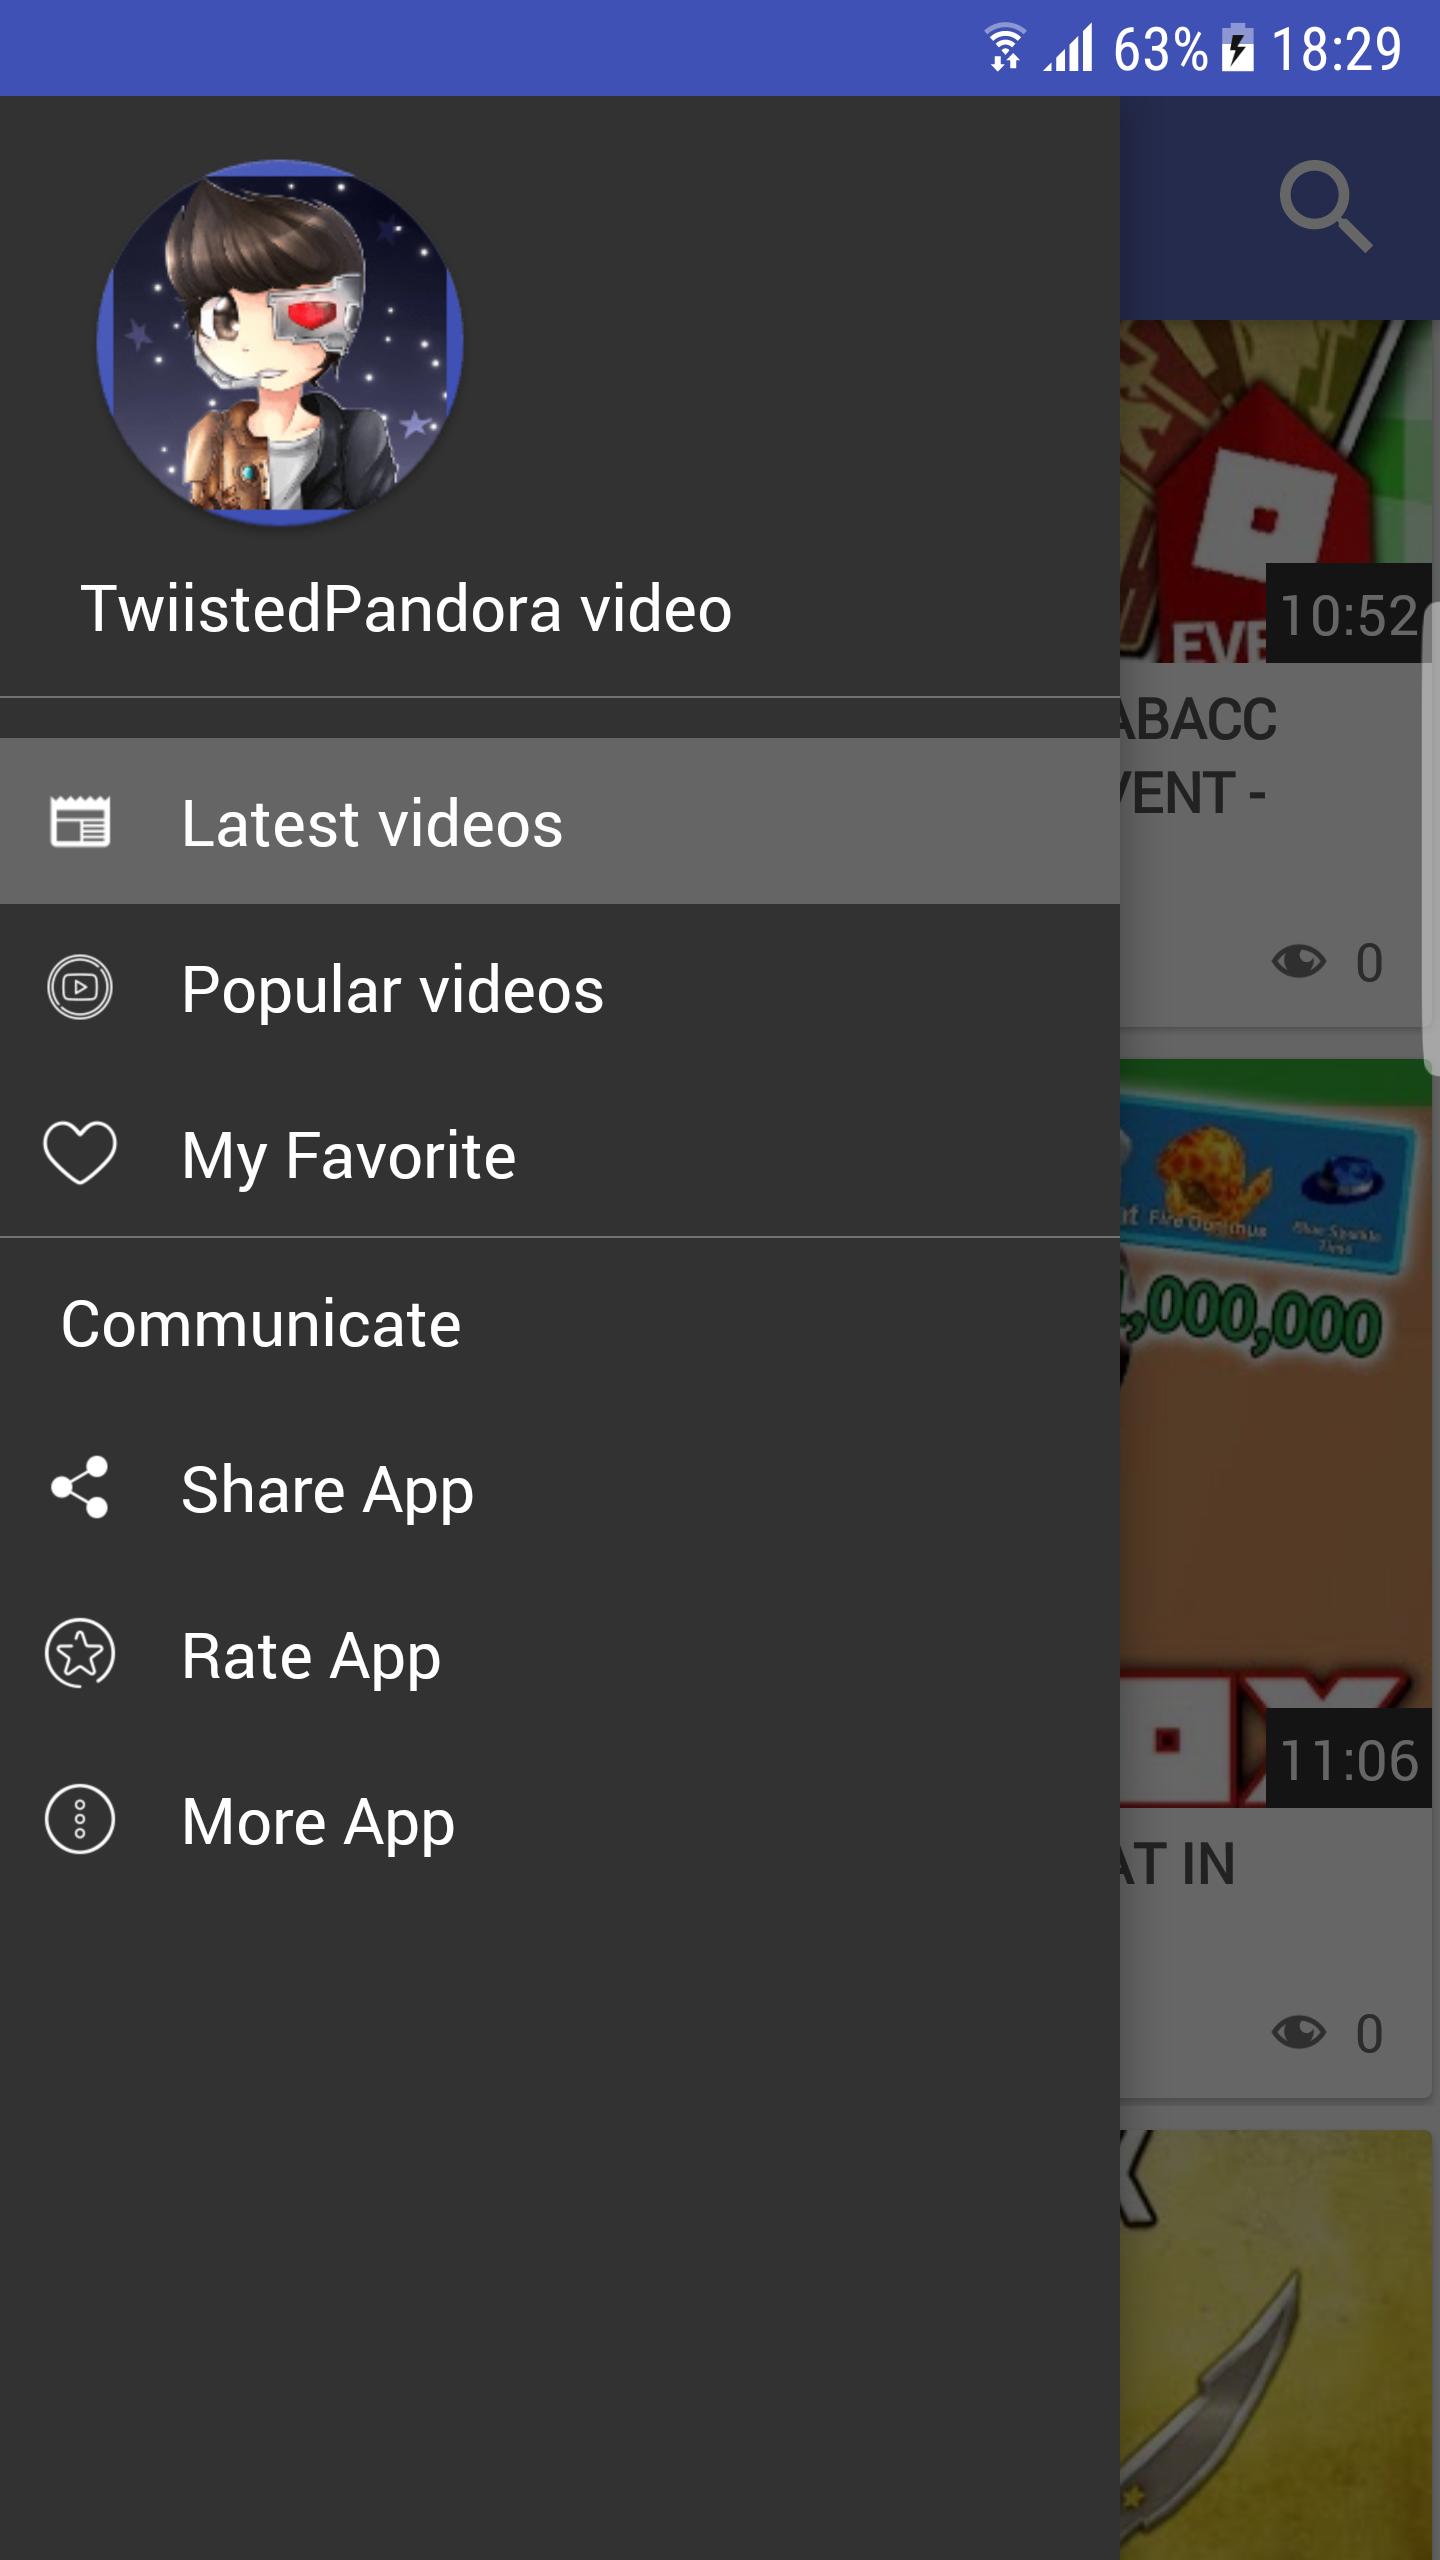 Twiistedpandora Roblox Video For Android Apk Download - event roblox 2018 twisted pandora youtube